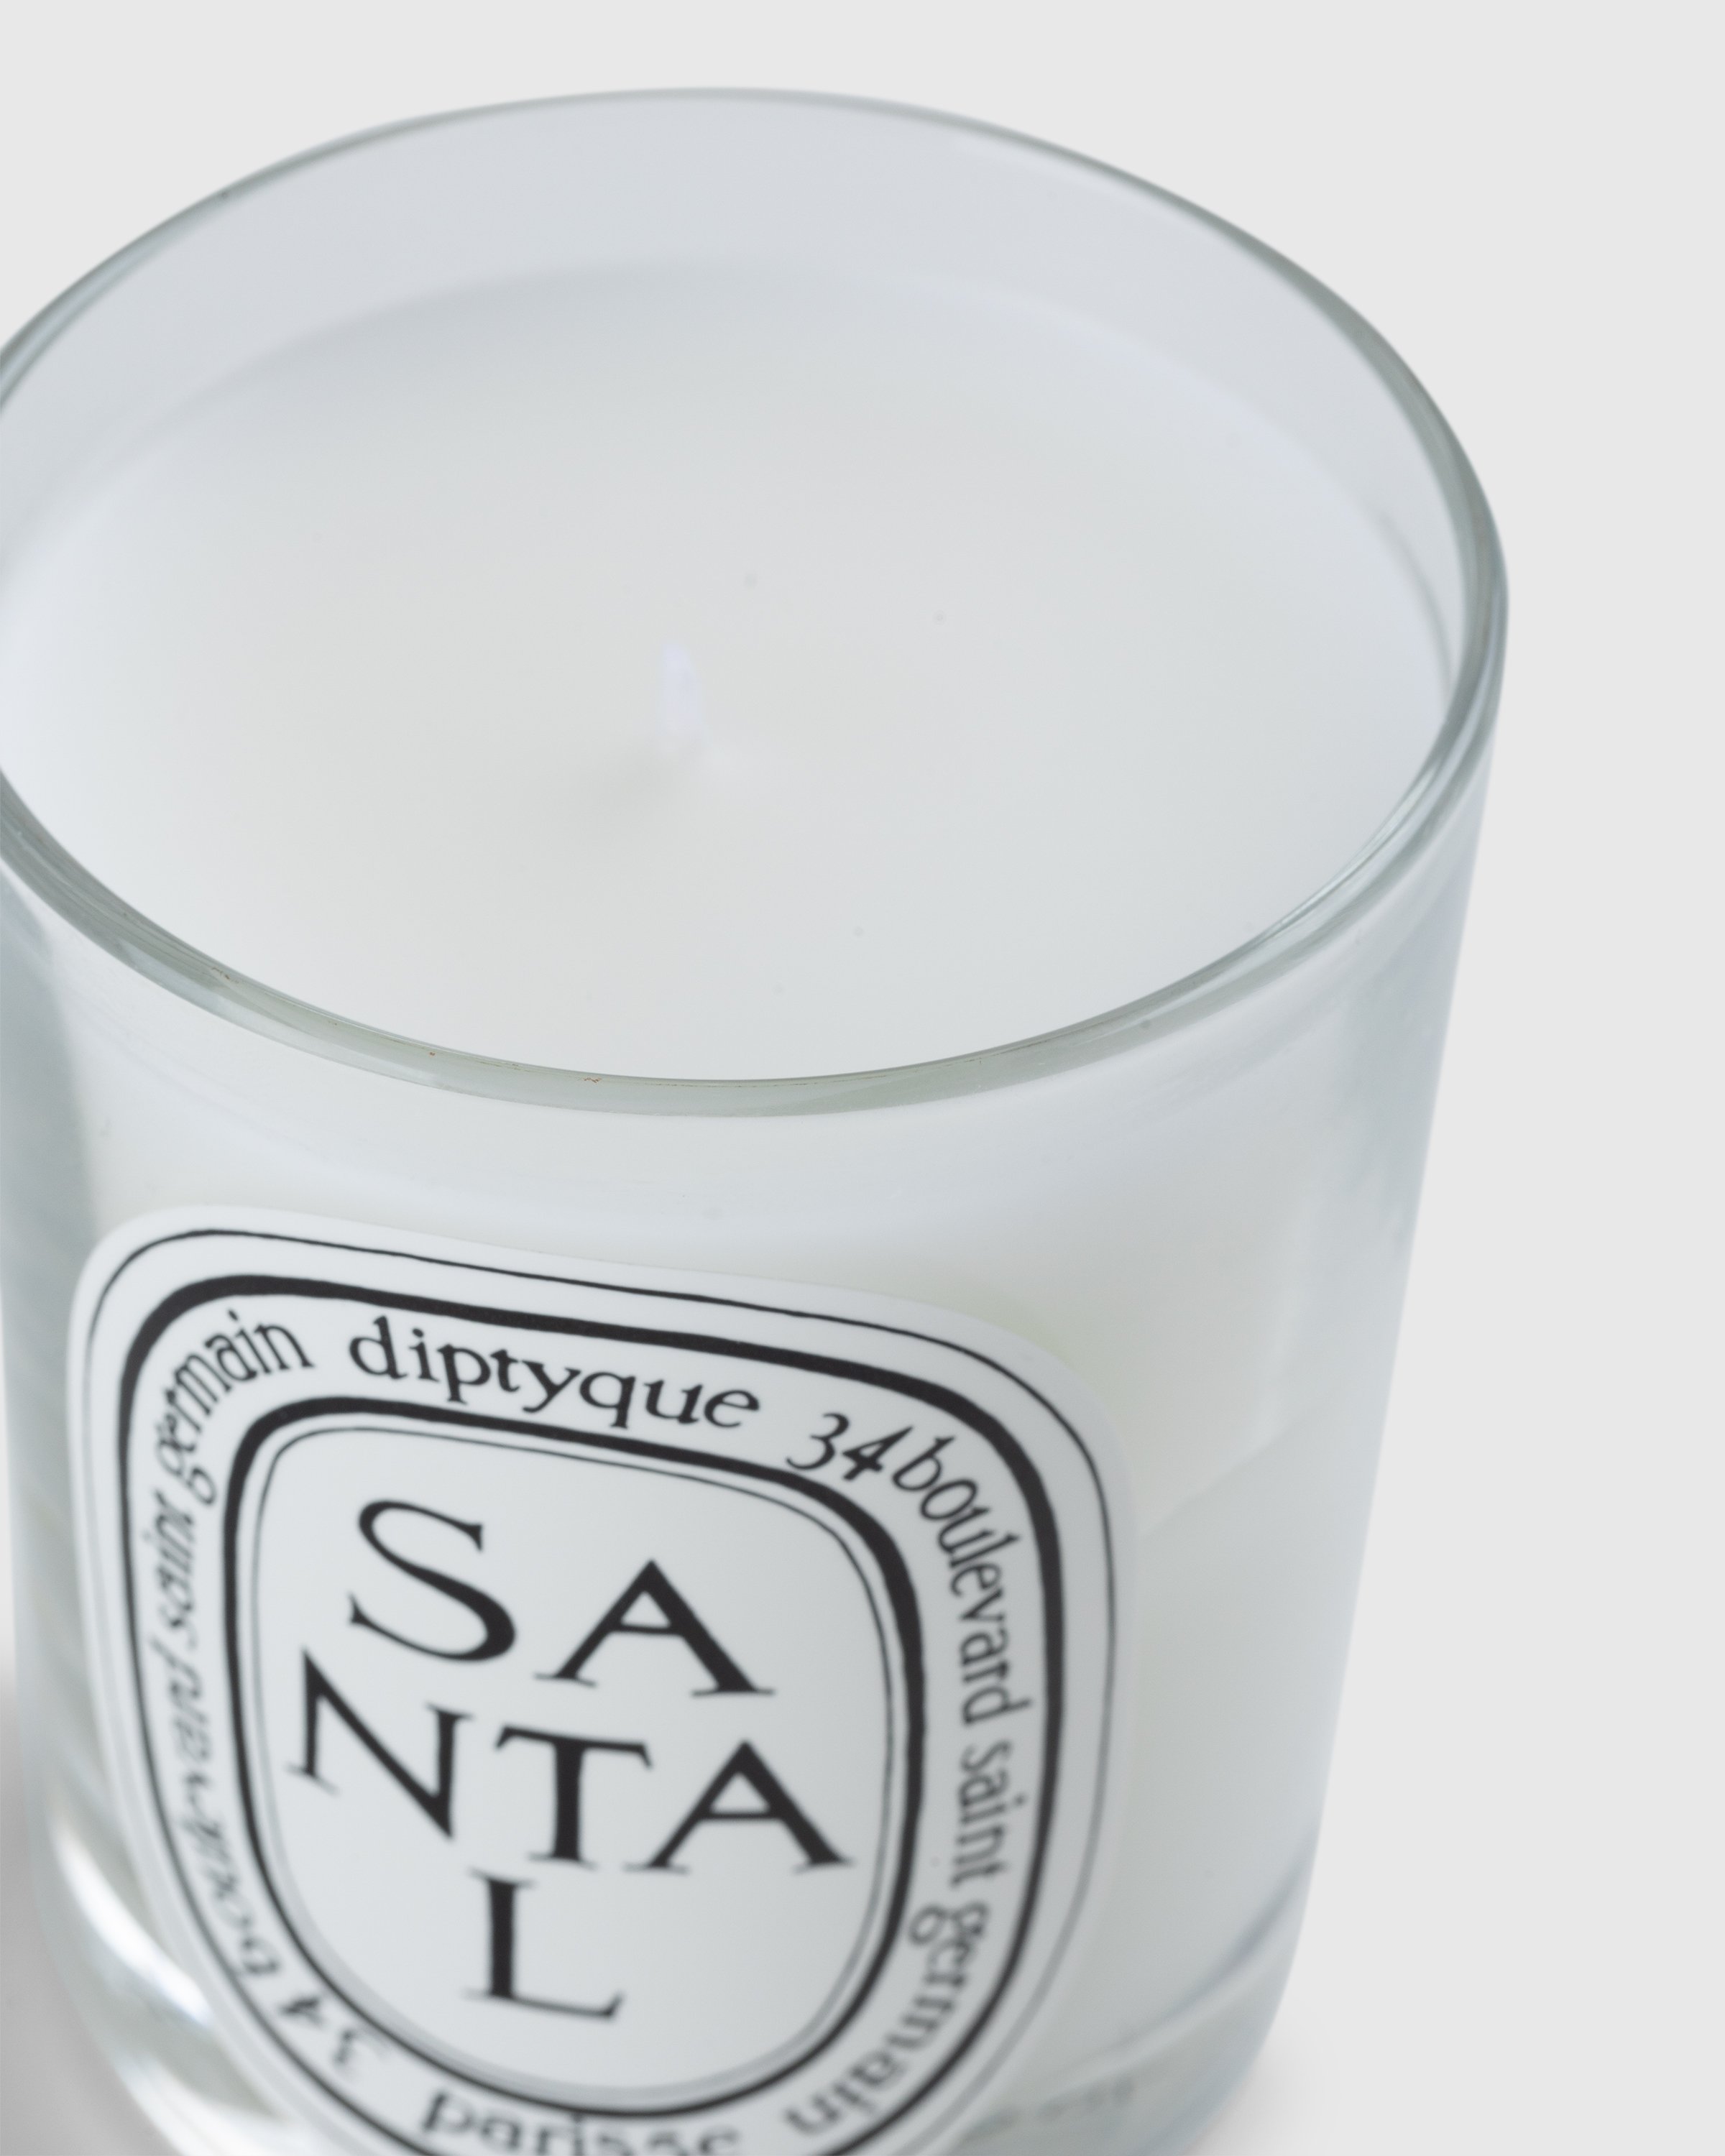 Diptyque - Standard Candle Santal 190g - Lifestyle - White - Image 2